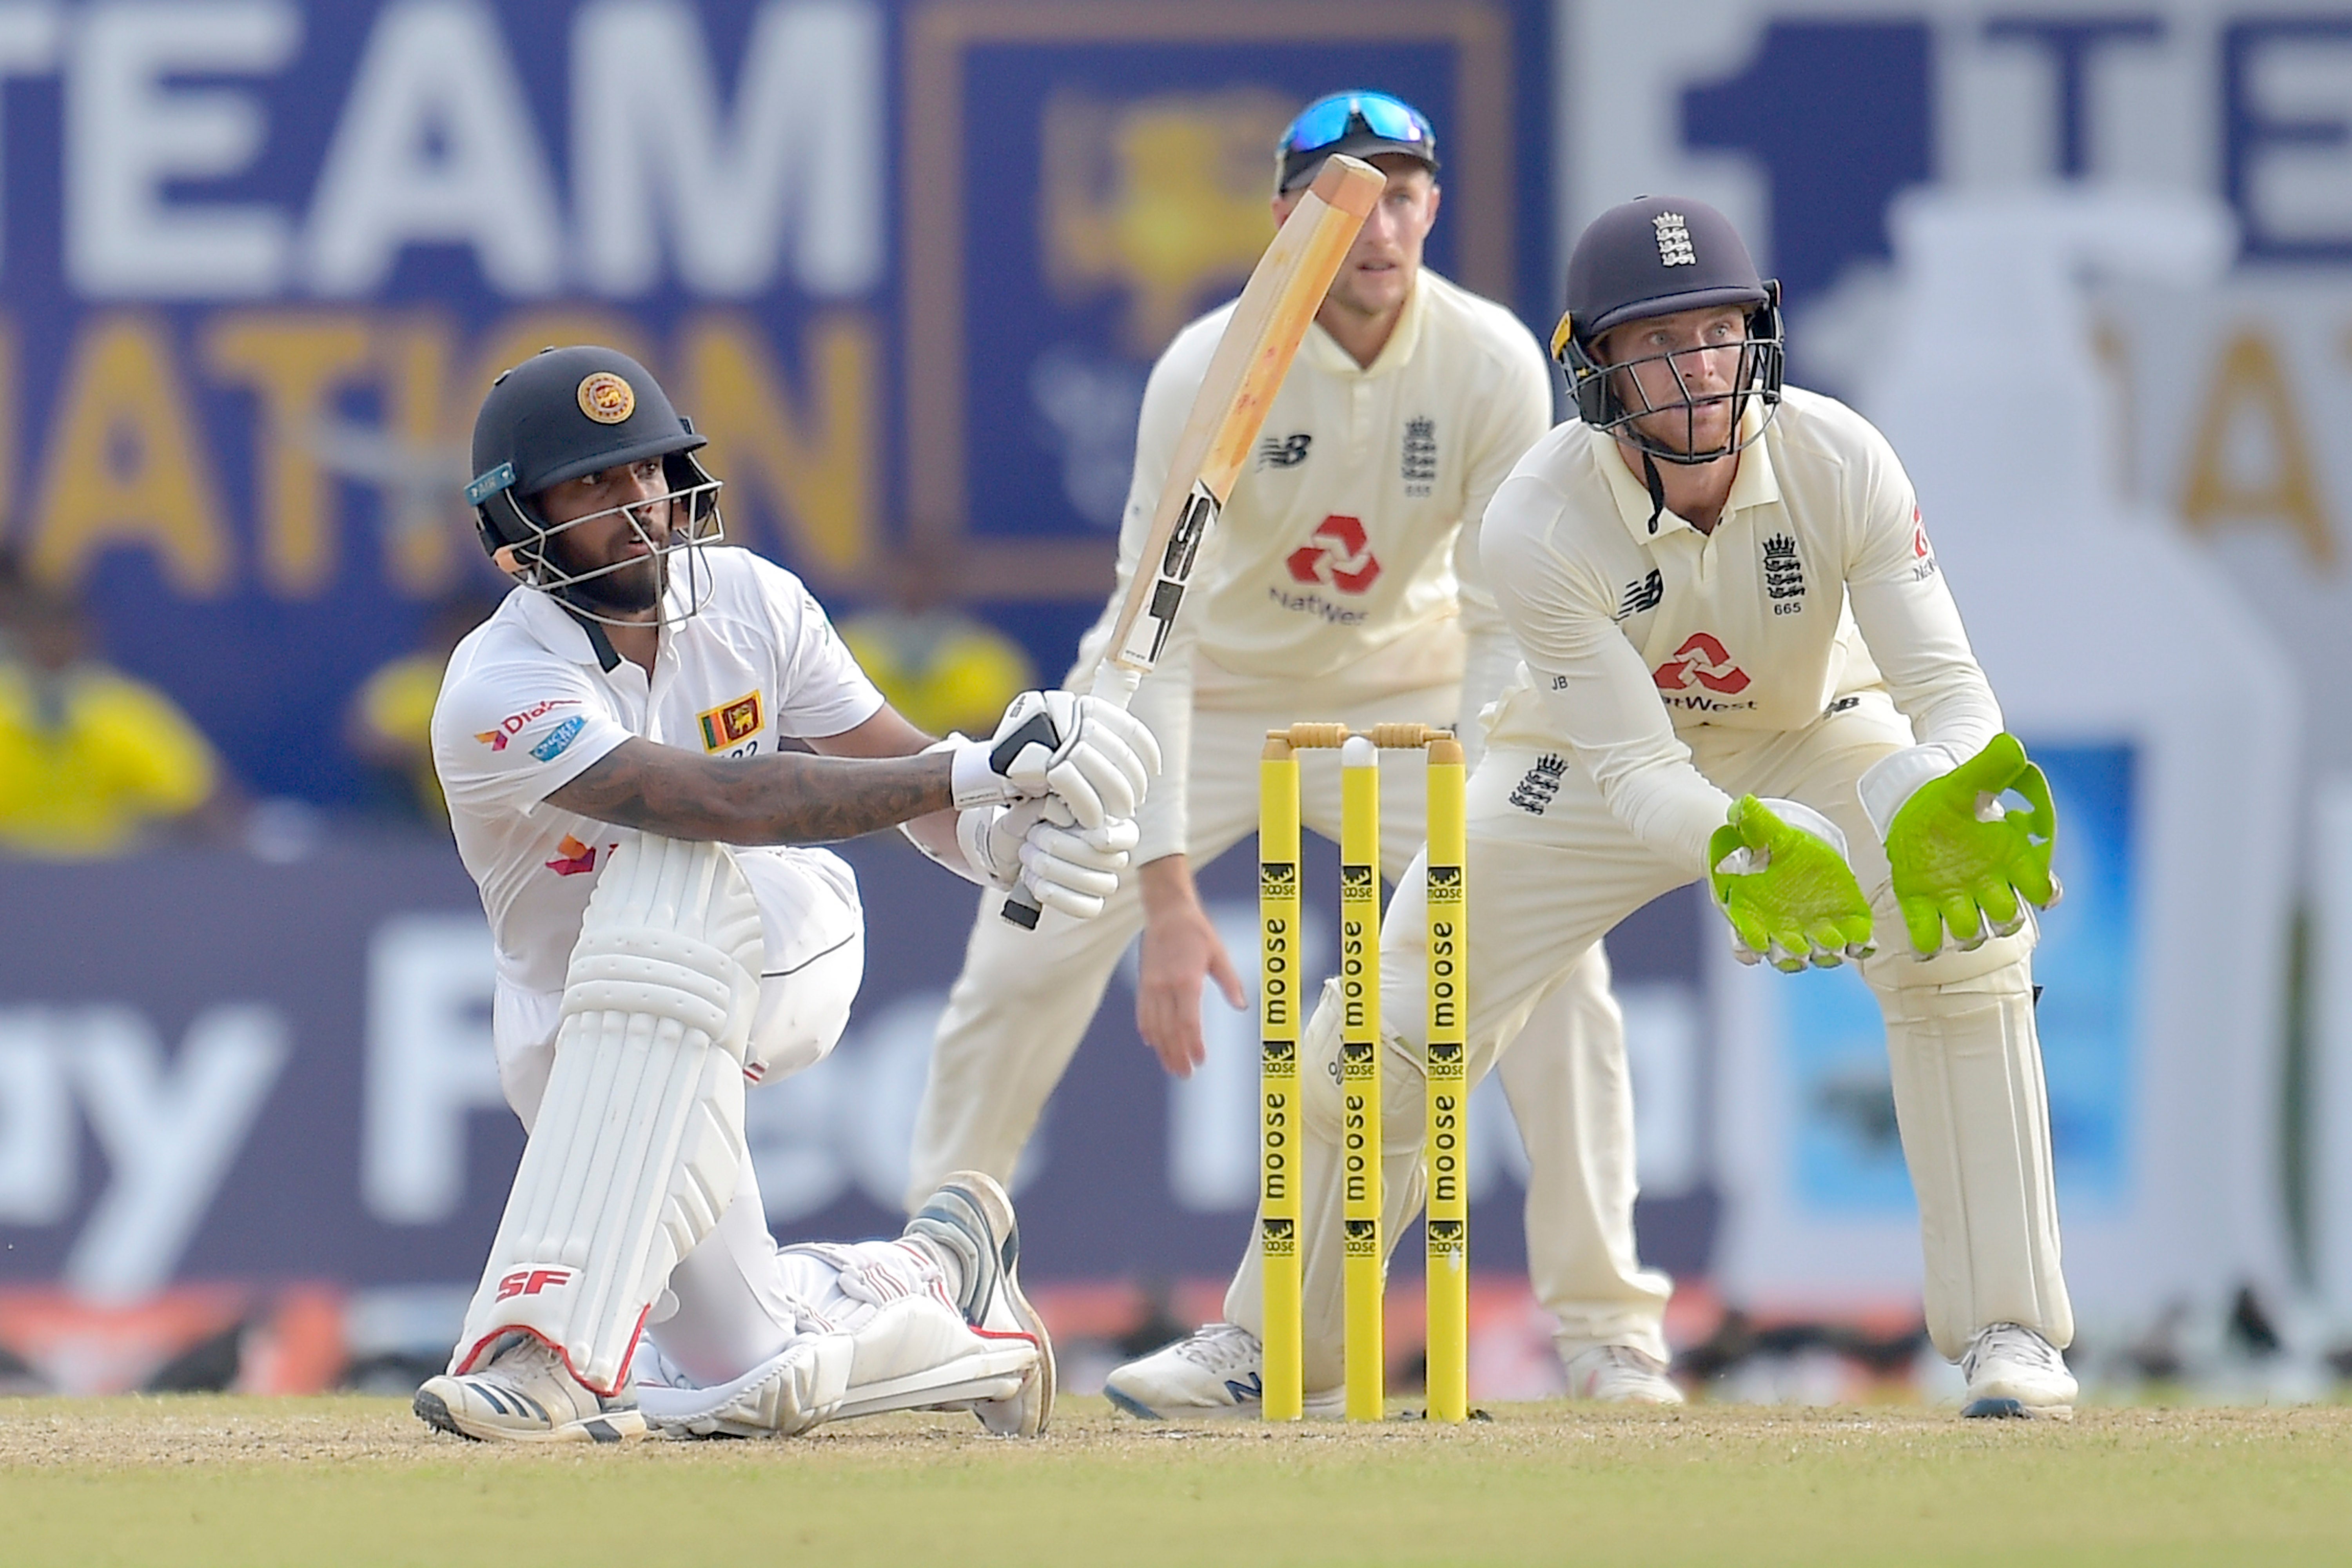 Sri Lanka are fighting in their second innings to erase their deficit